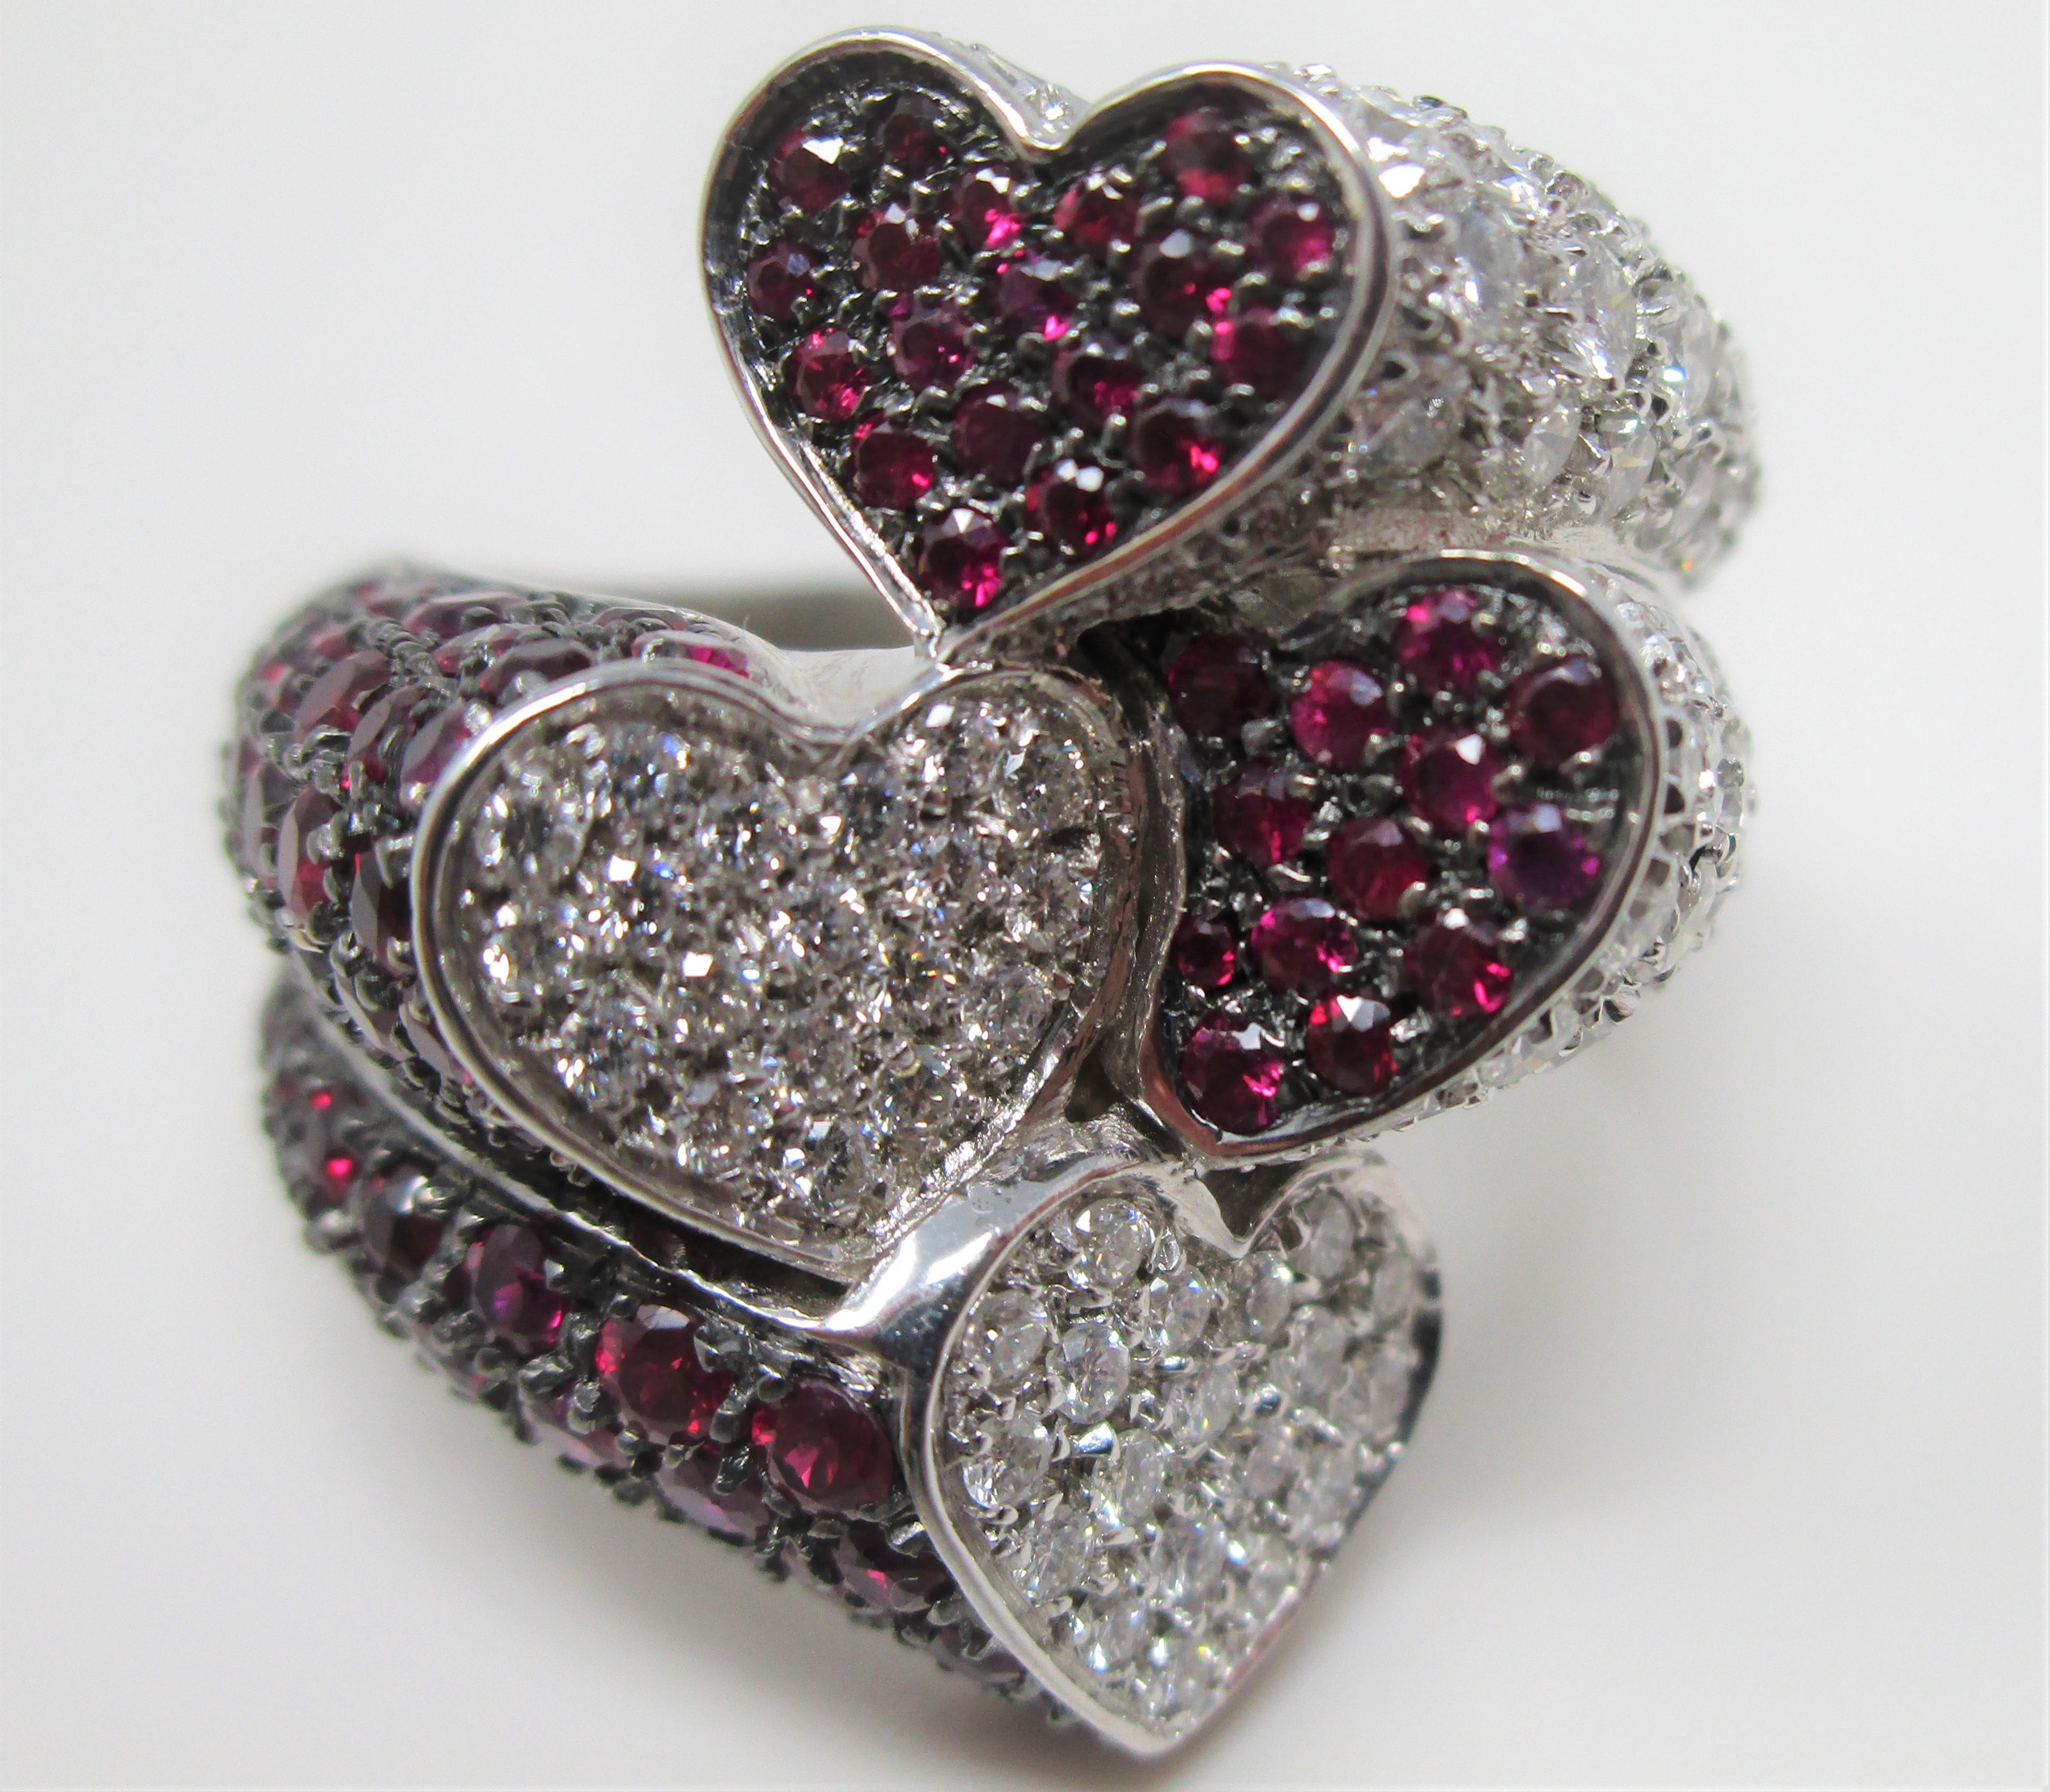 You don't have to be a heart lover to admire this ring!  In 18 karat white gold and black rhodium, with approximately 2.00 carats of diamonds and approximately 3.00 carats of rubies, this by pass ring is a stunner and very comfortable! Size 7.25.
